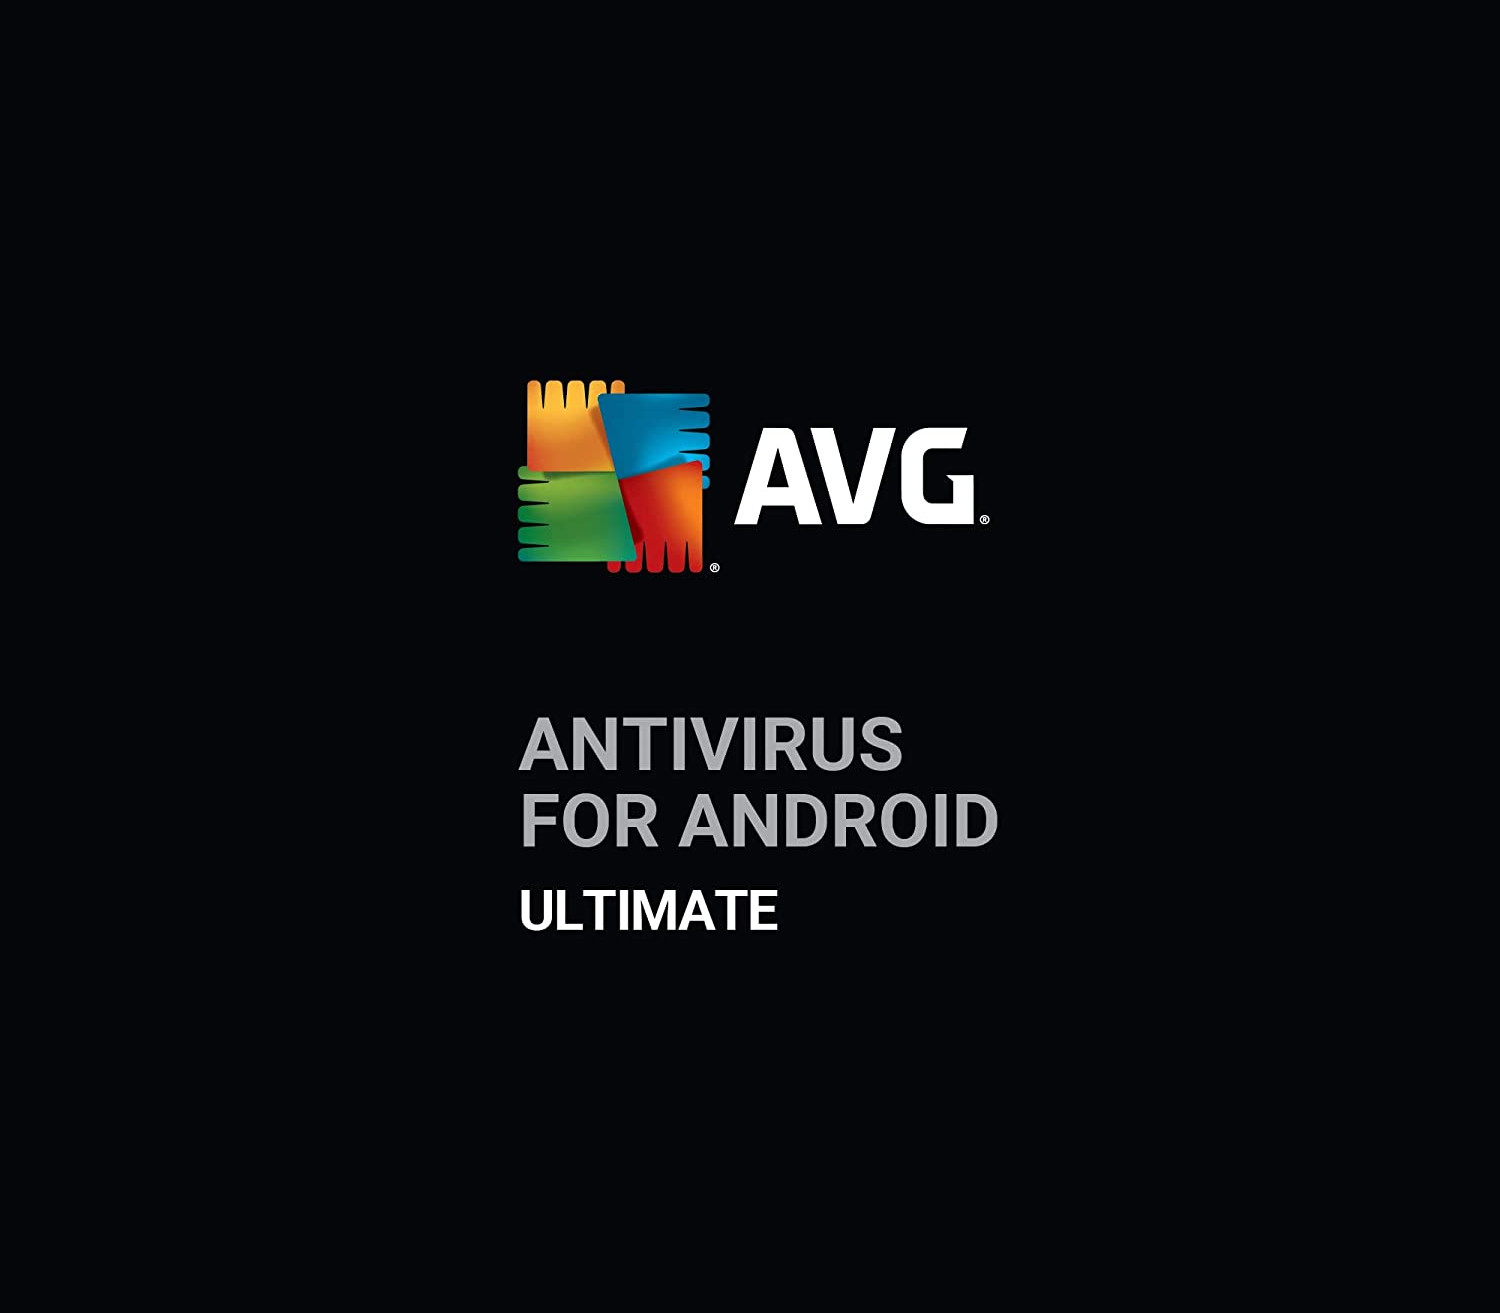 AVG Antivirus for Android - Ultimate Key (1 Year / 1 Device) 6.84 USD